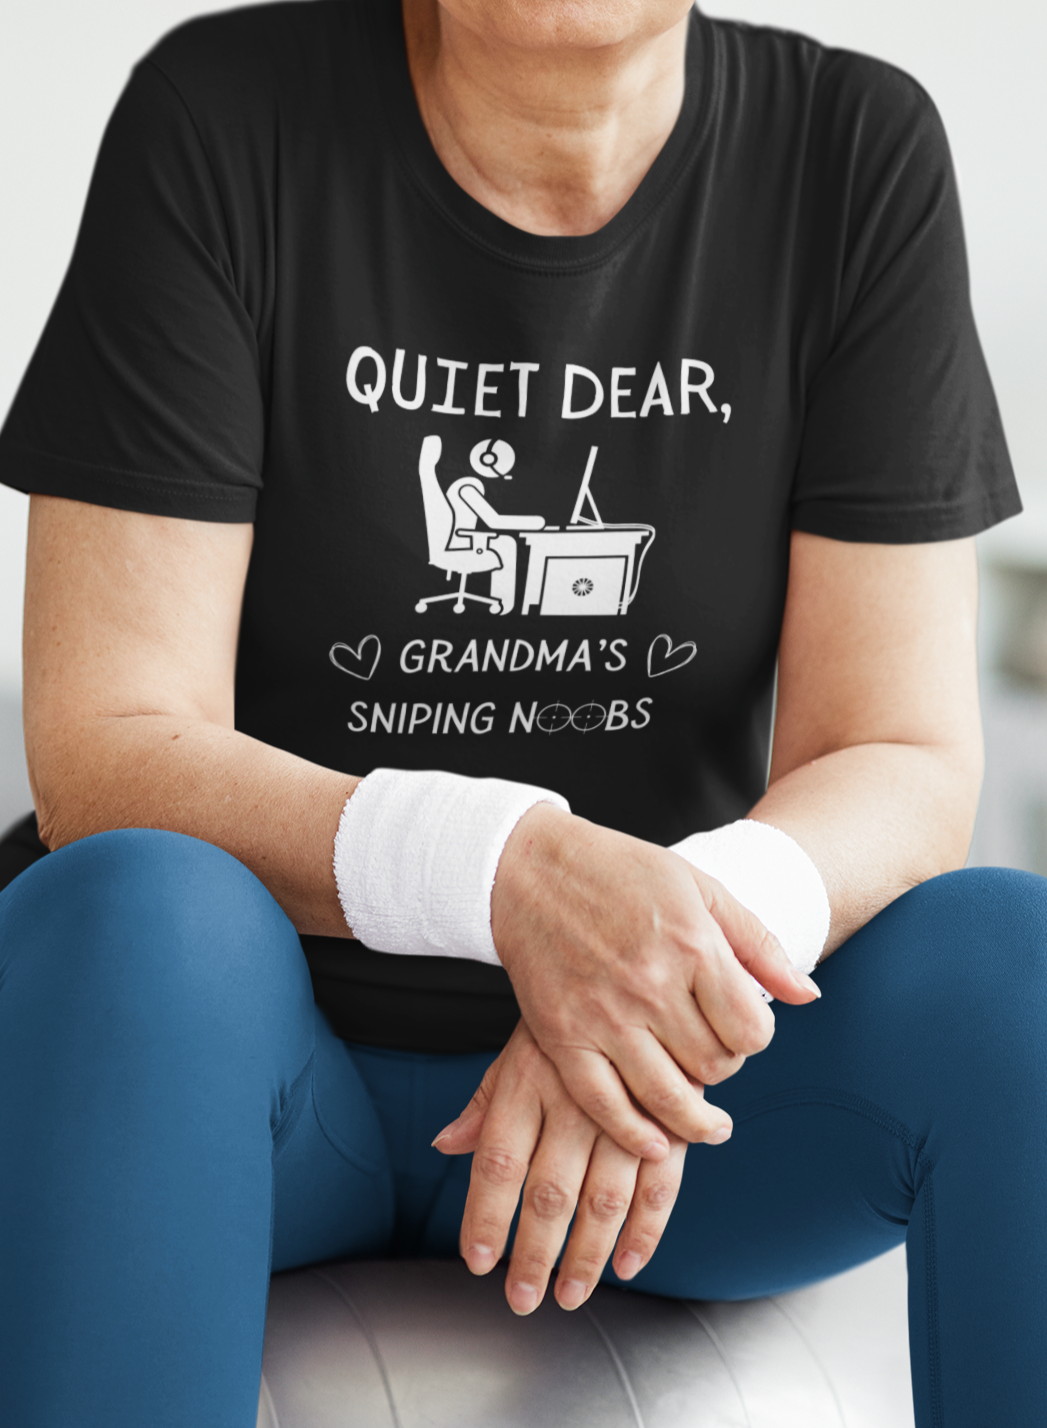 A model wearing a black t-shirt that reads Quiet Dear, Grandma's Sniping Noobs in white text. The lower text is framed by two hearts, and the O's are in the shape of sniper scopes. In the center of the shirt is an image of a person at a desk with a gaming PC.